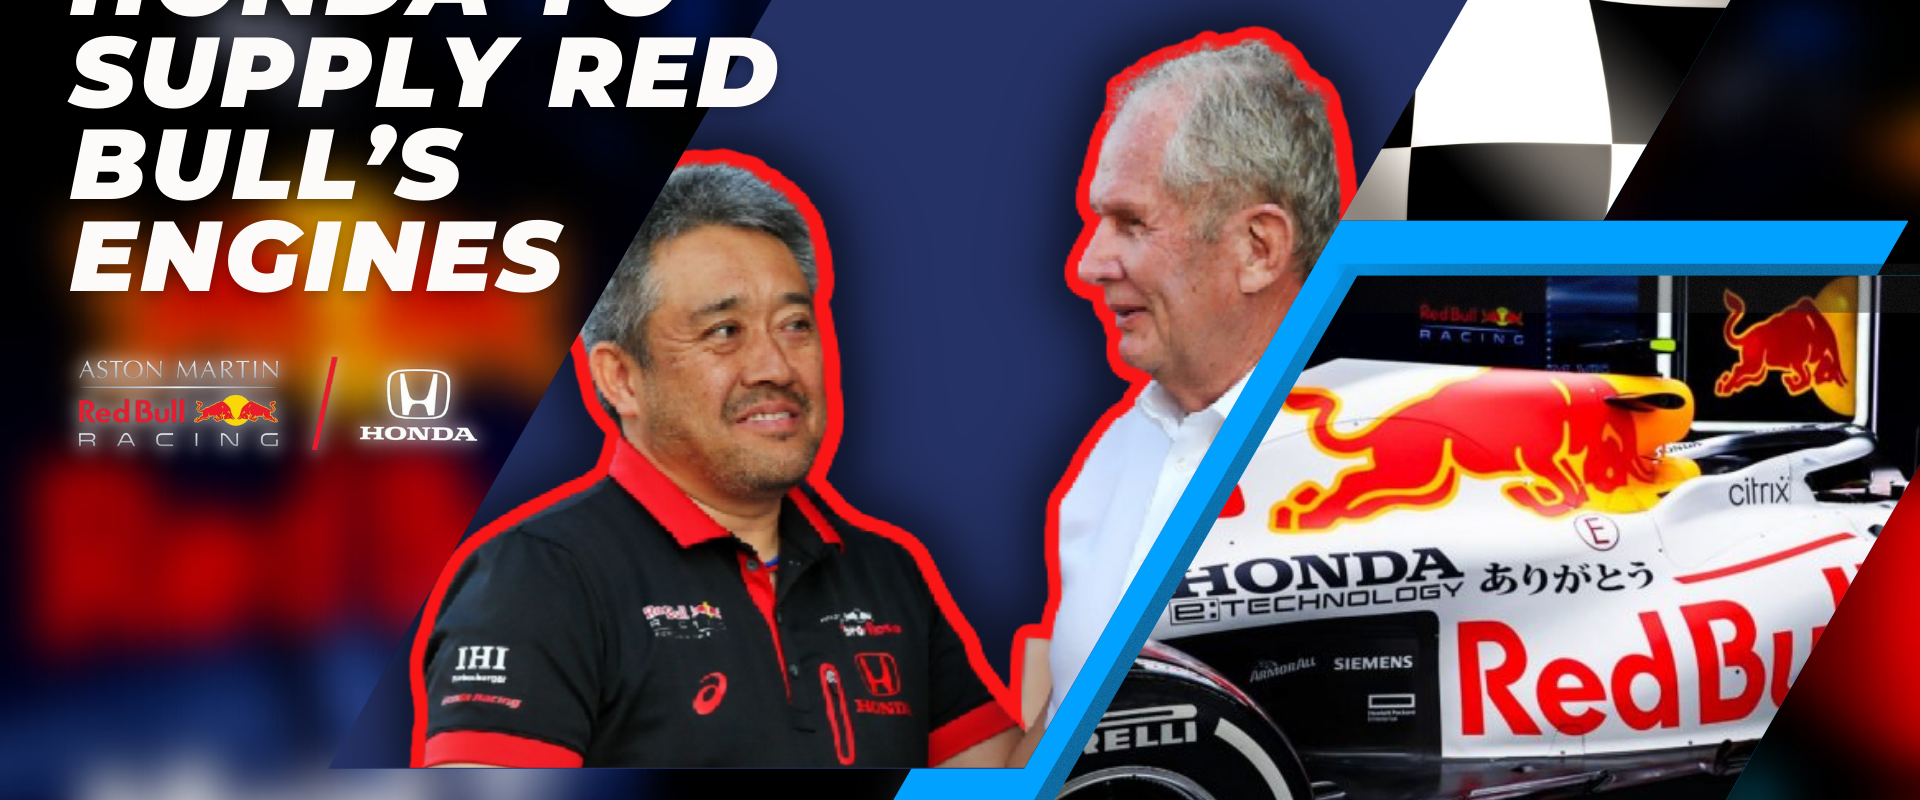 1980x1080_Honda to Supply Red Bull’s Engines Until 2025